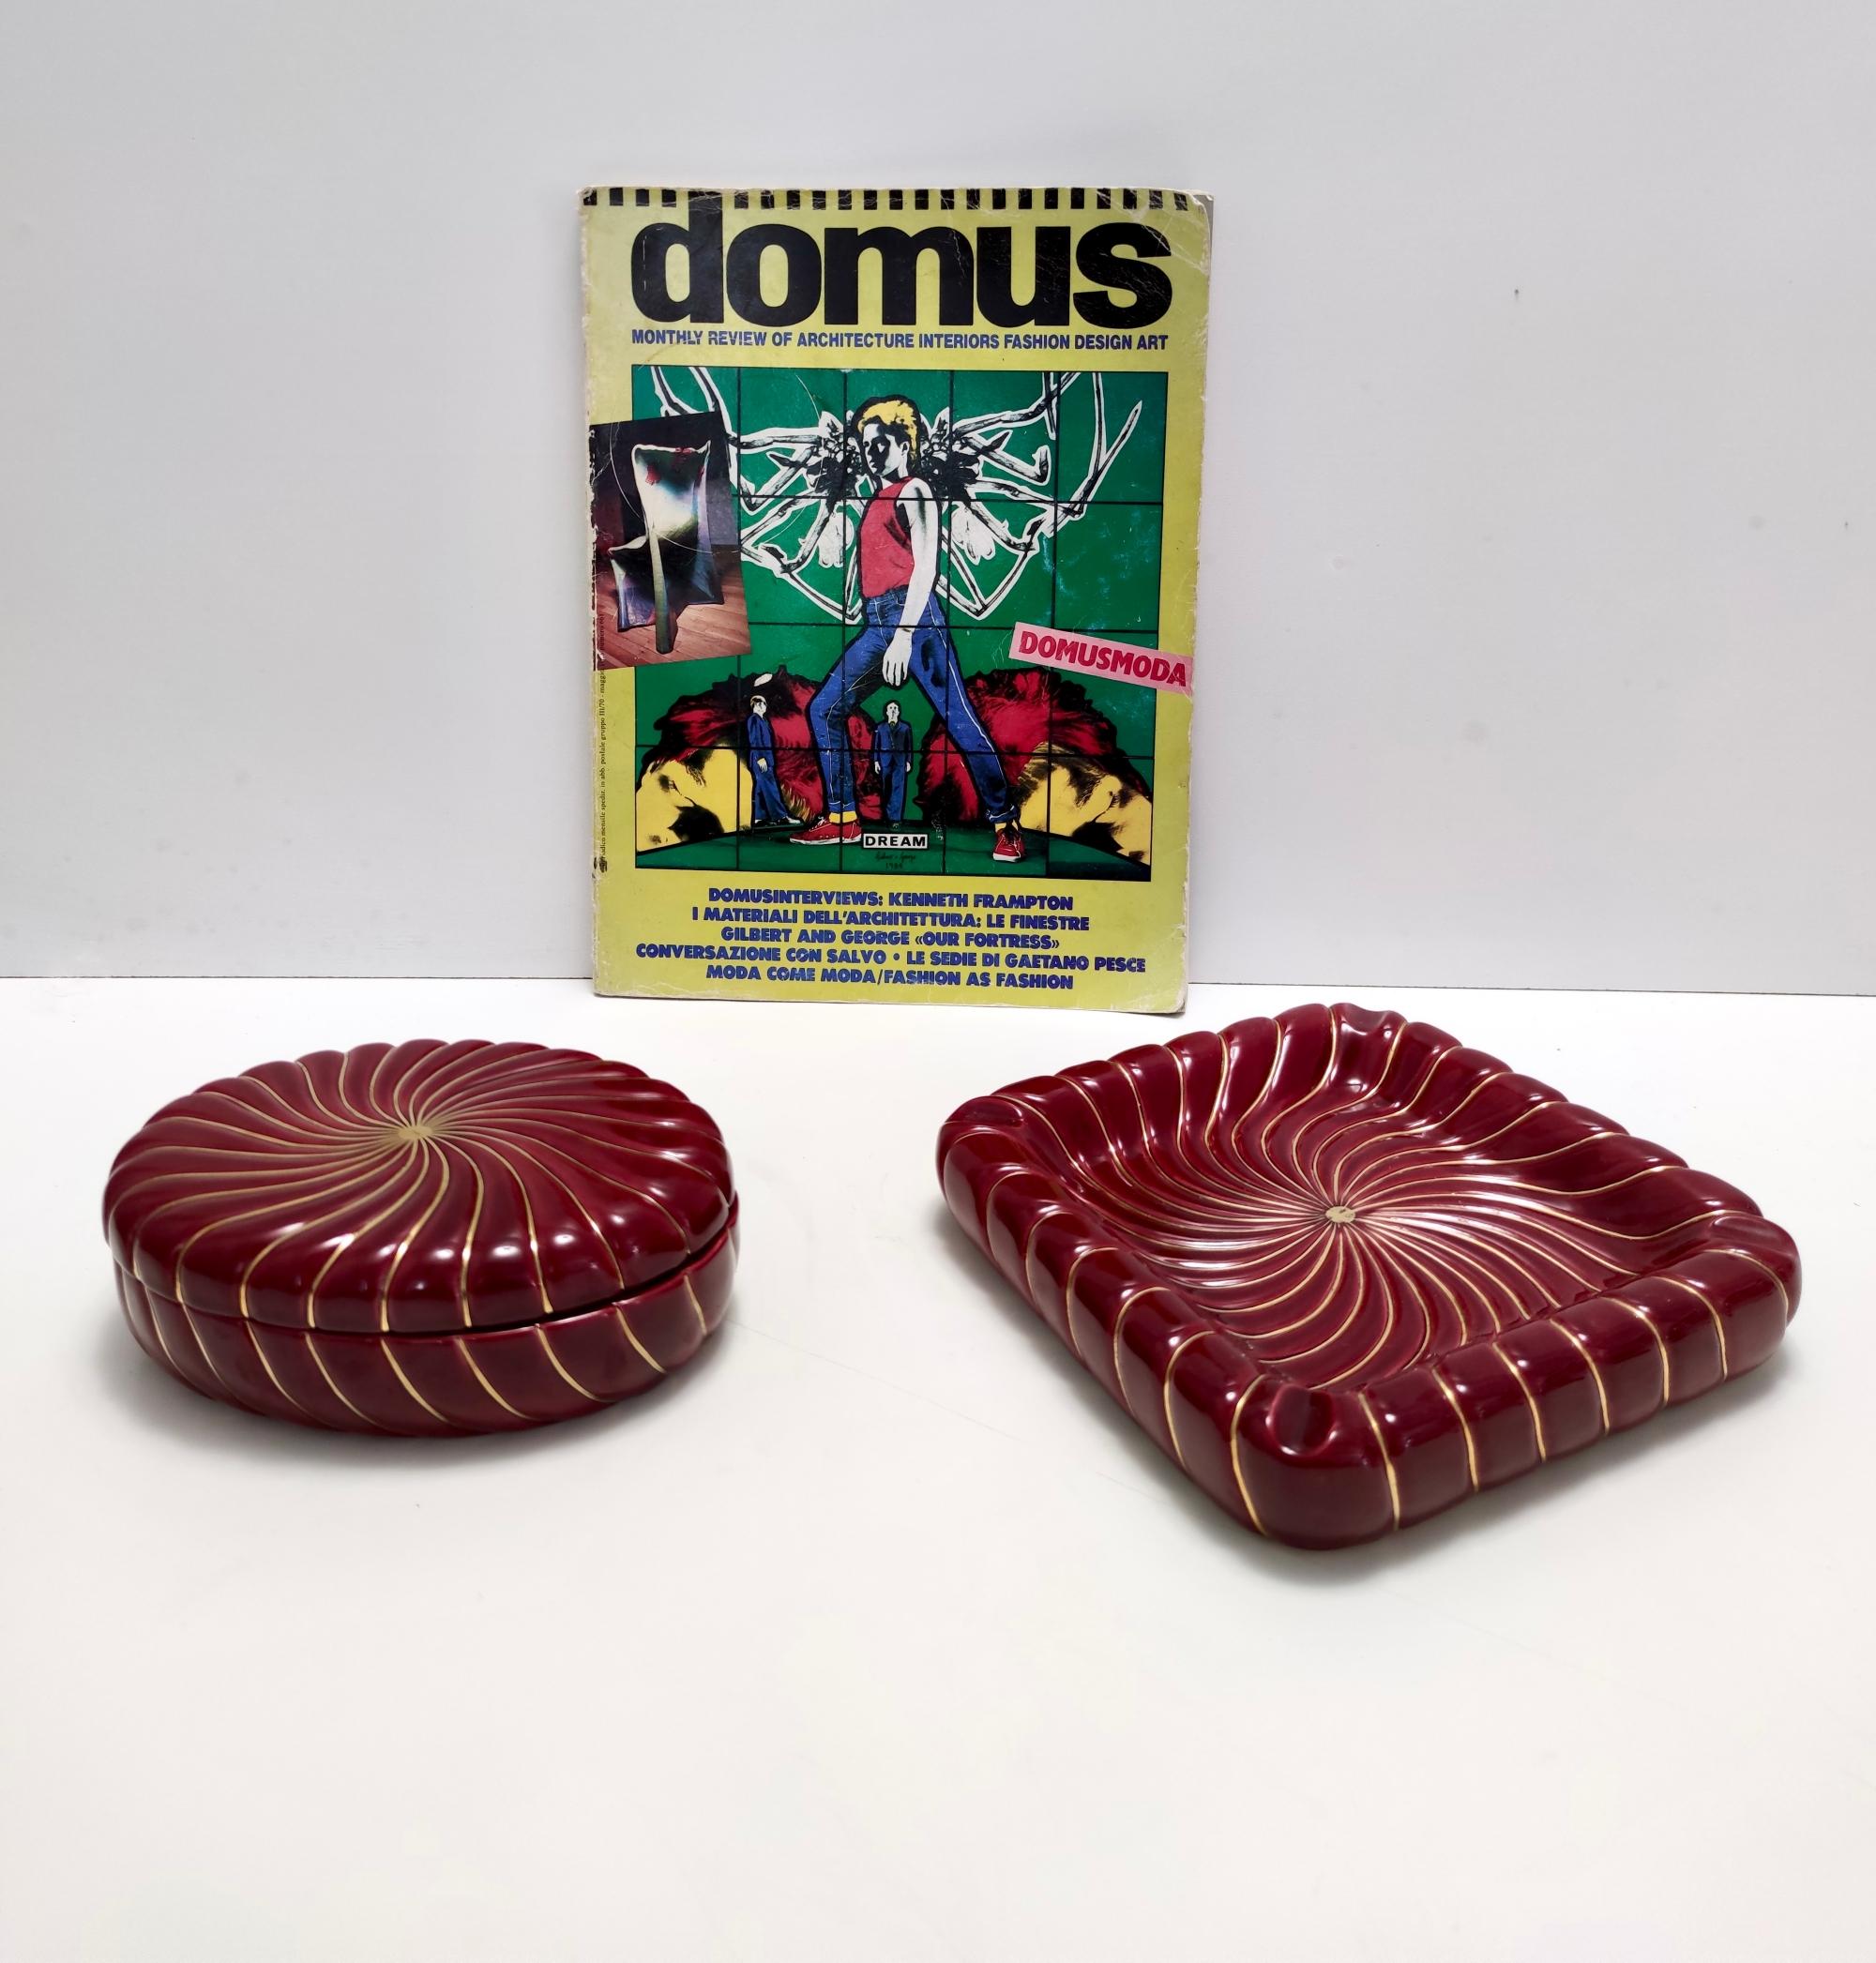 Made in Italy, 1970s - 1980s. 
These trinket bowls / ashtrays are made in glazed and boldened ceramic. 
They might show slight traces of use, but they can be considered as in excellent original condition and ready to become a piece in a home.